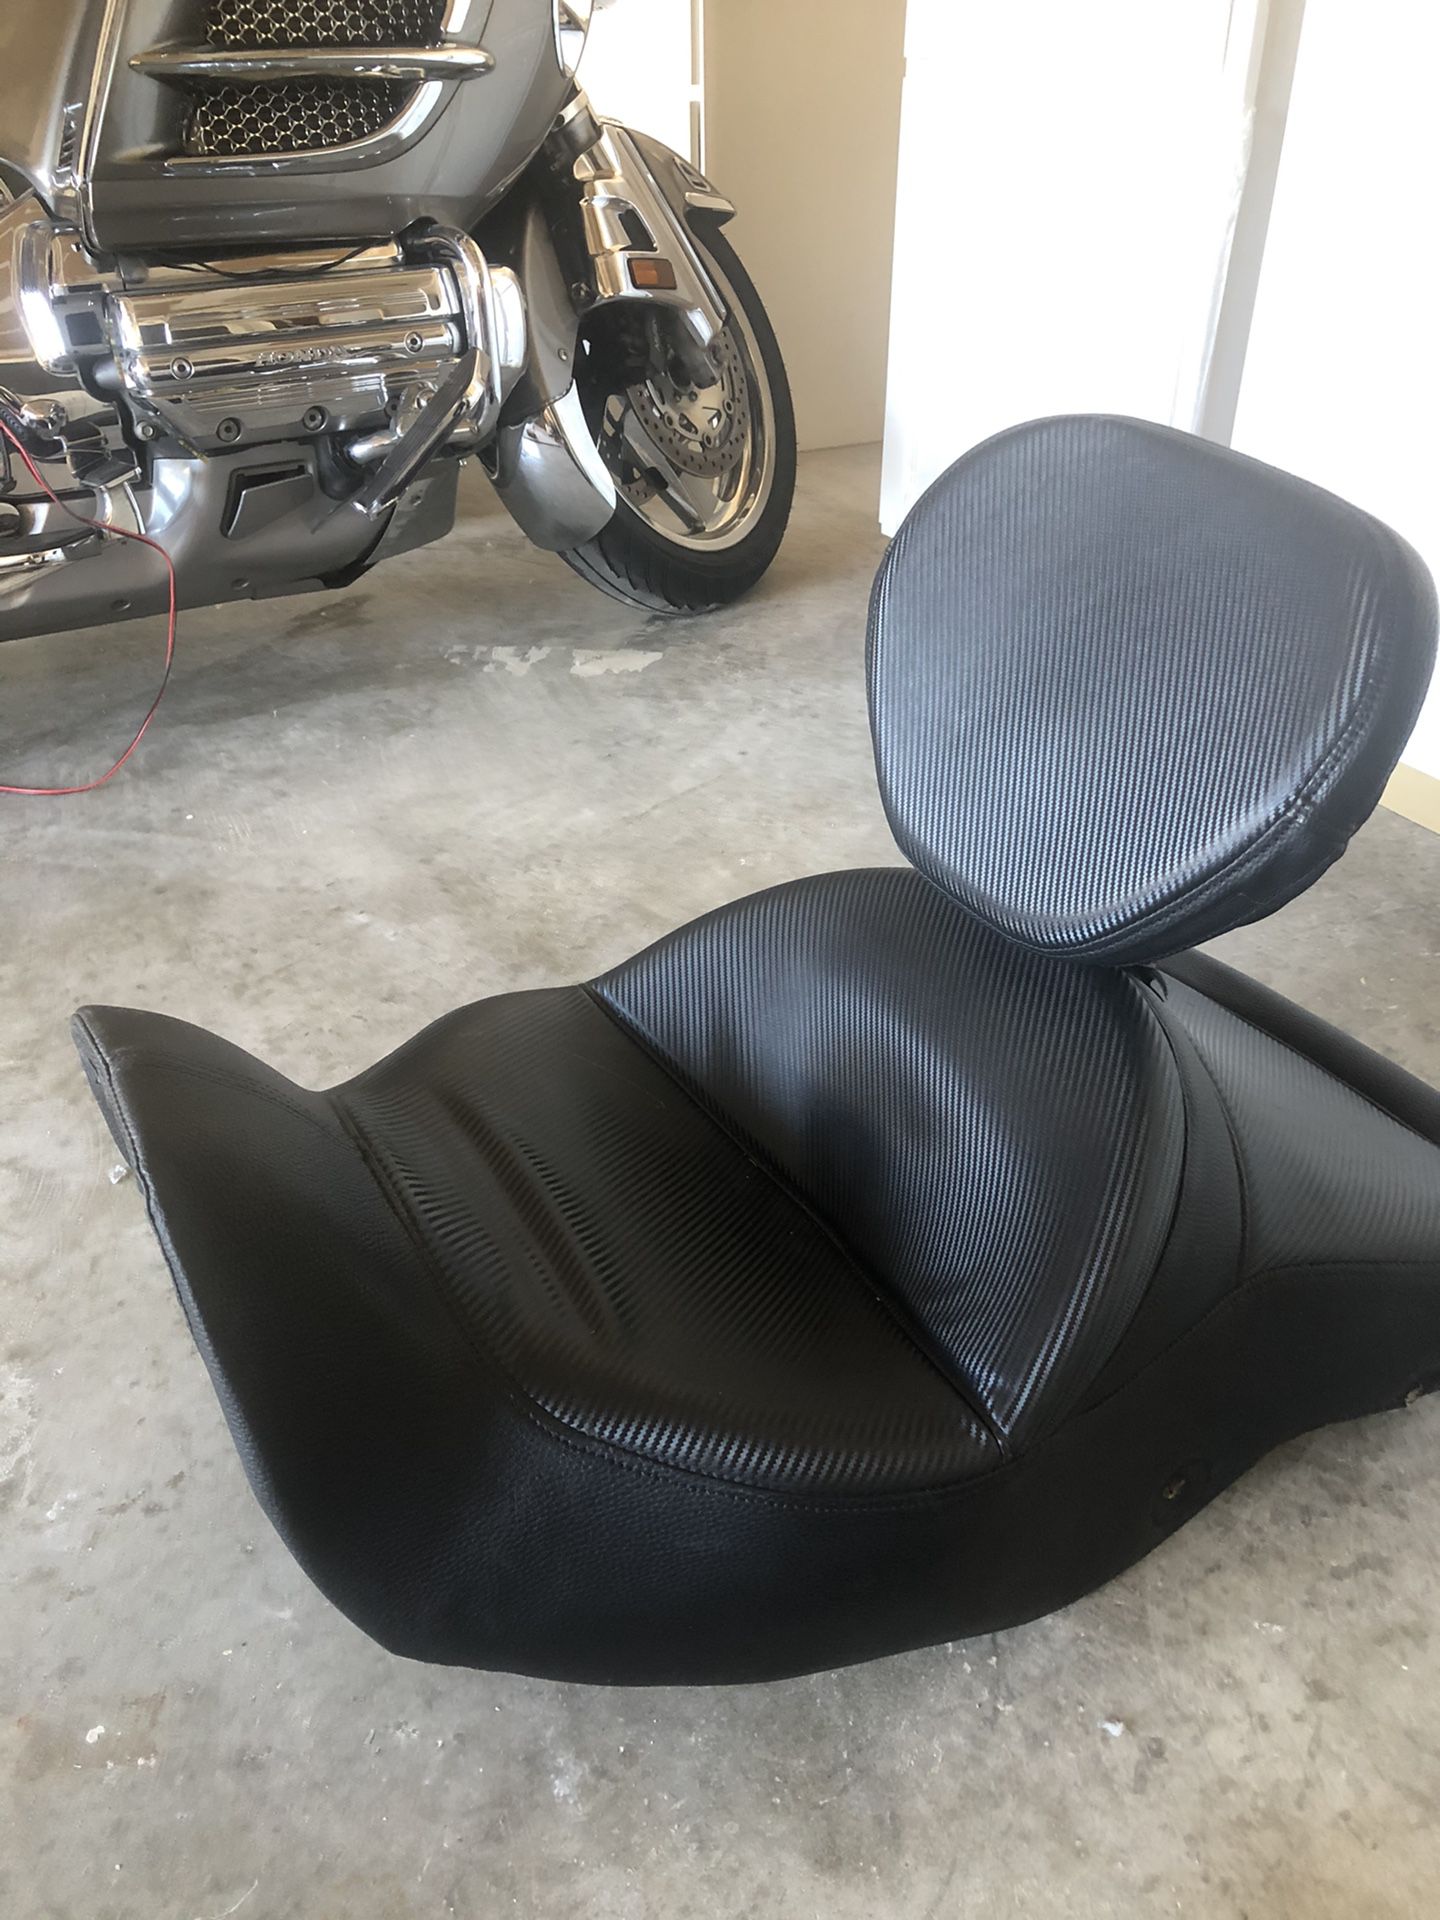 Photo GL1800 Gold wing Seat